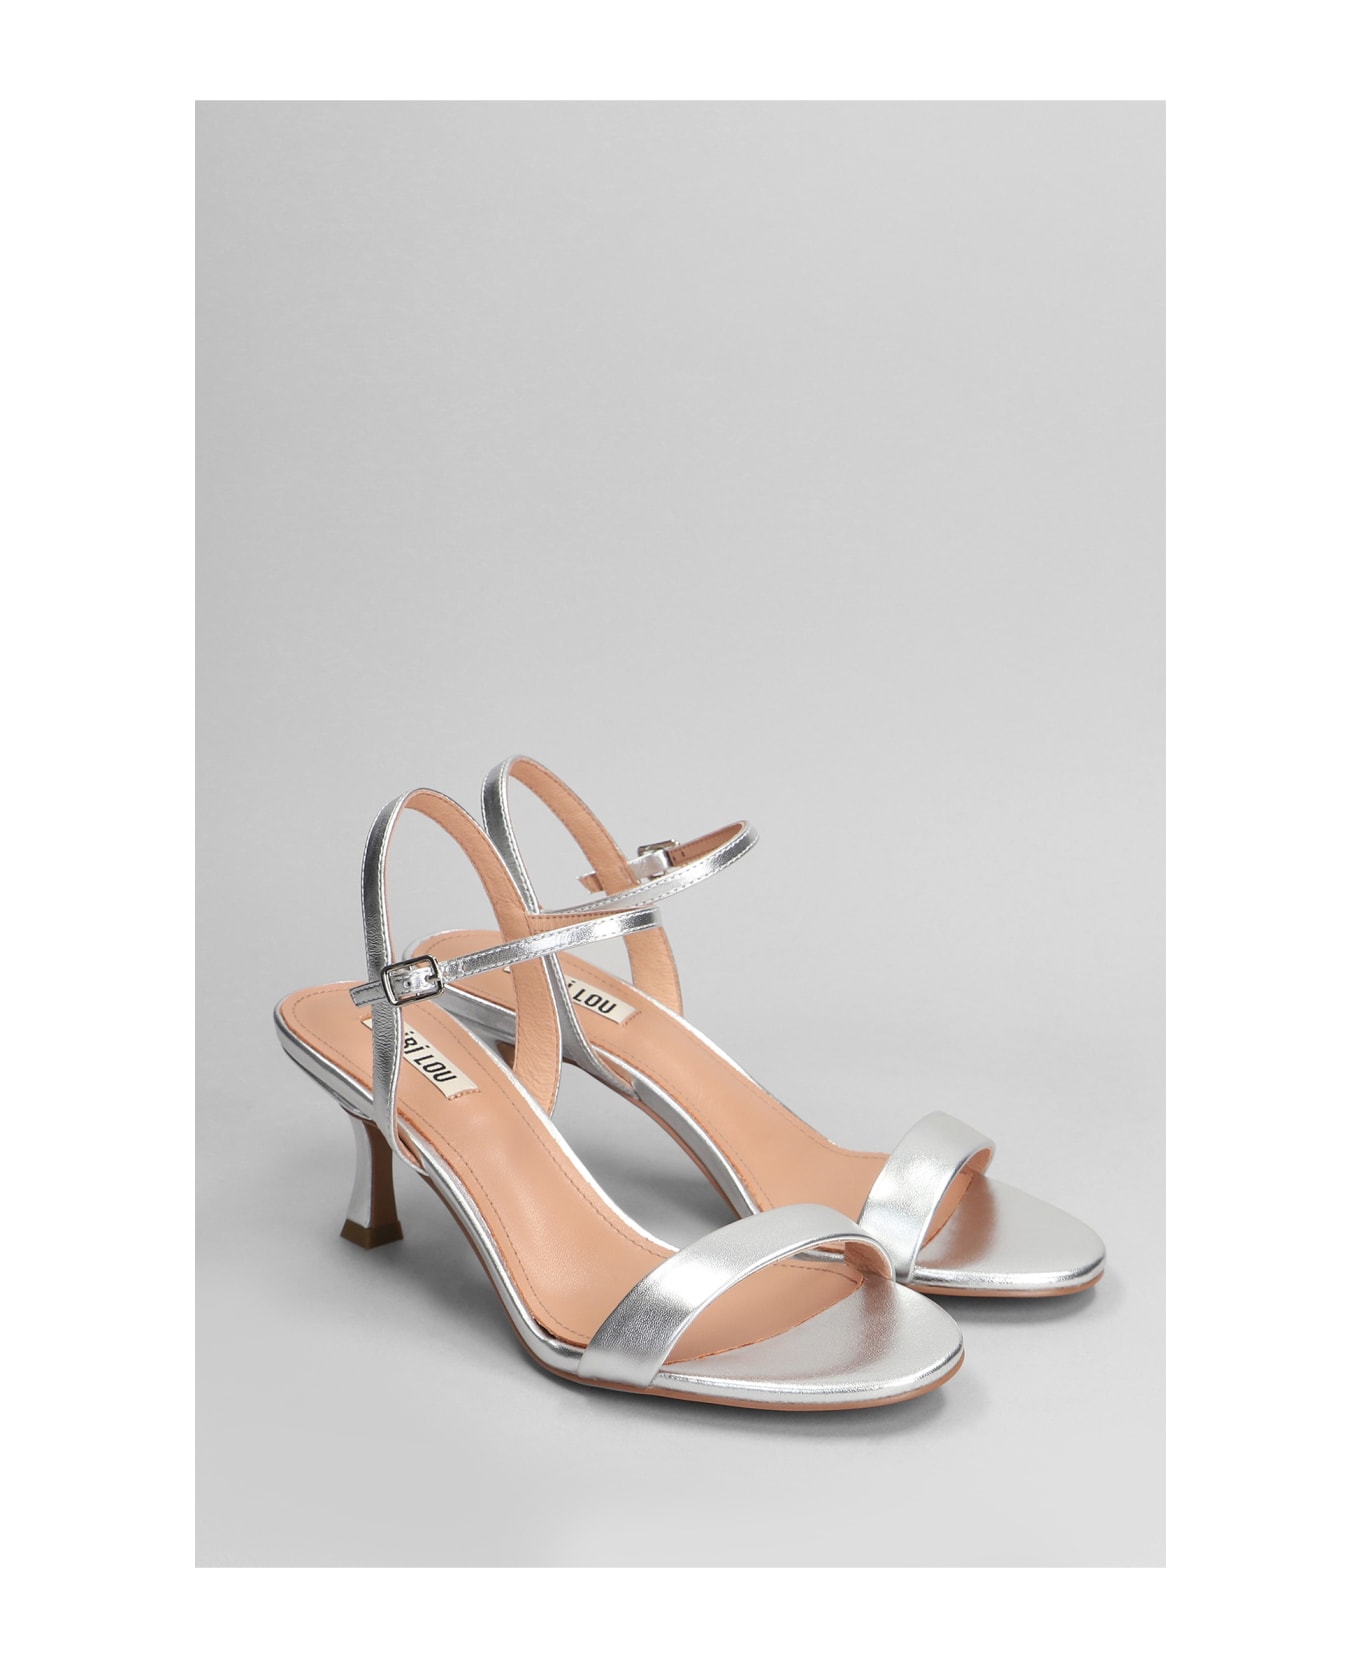 Bibi Lou Lotus 65 Sandals In Silver Leather - silver